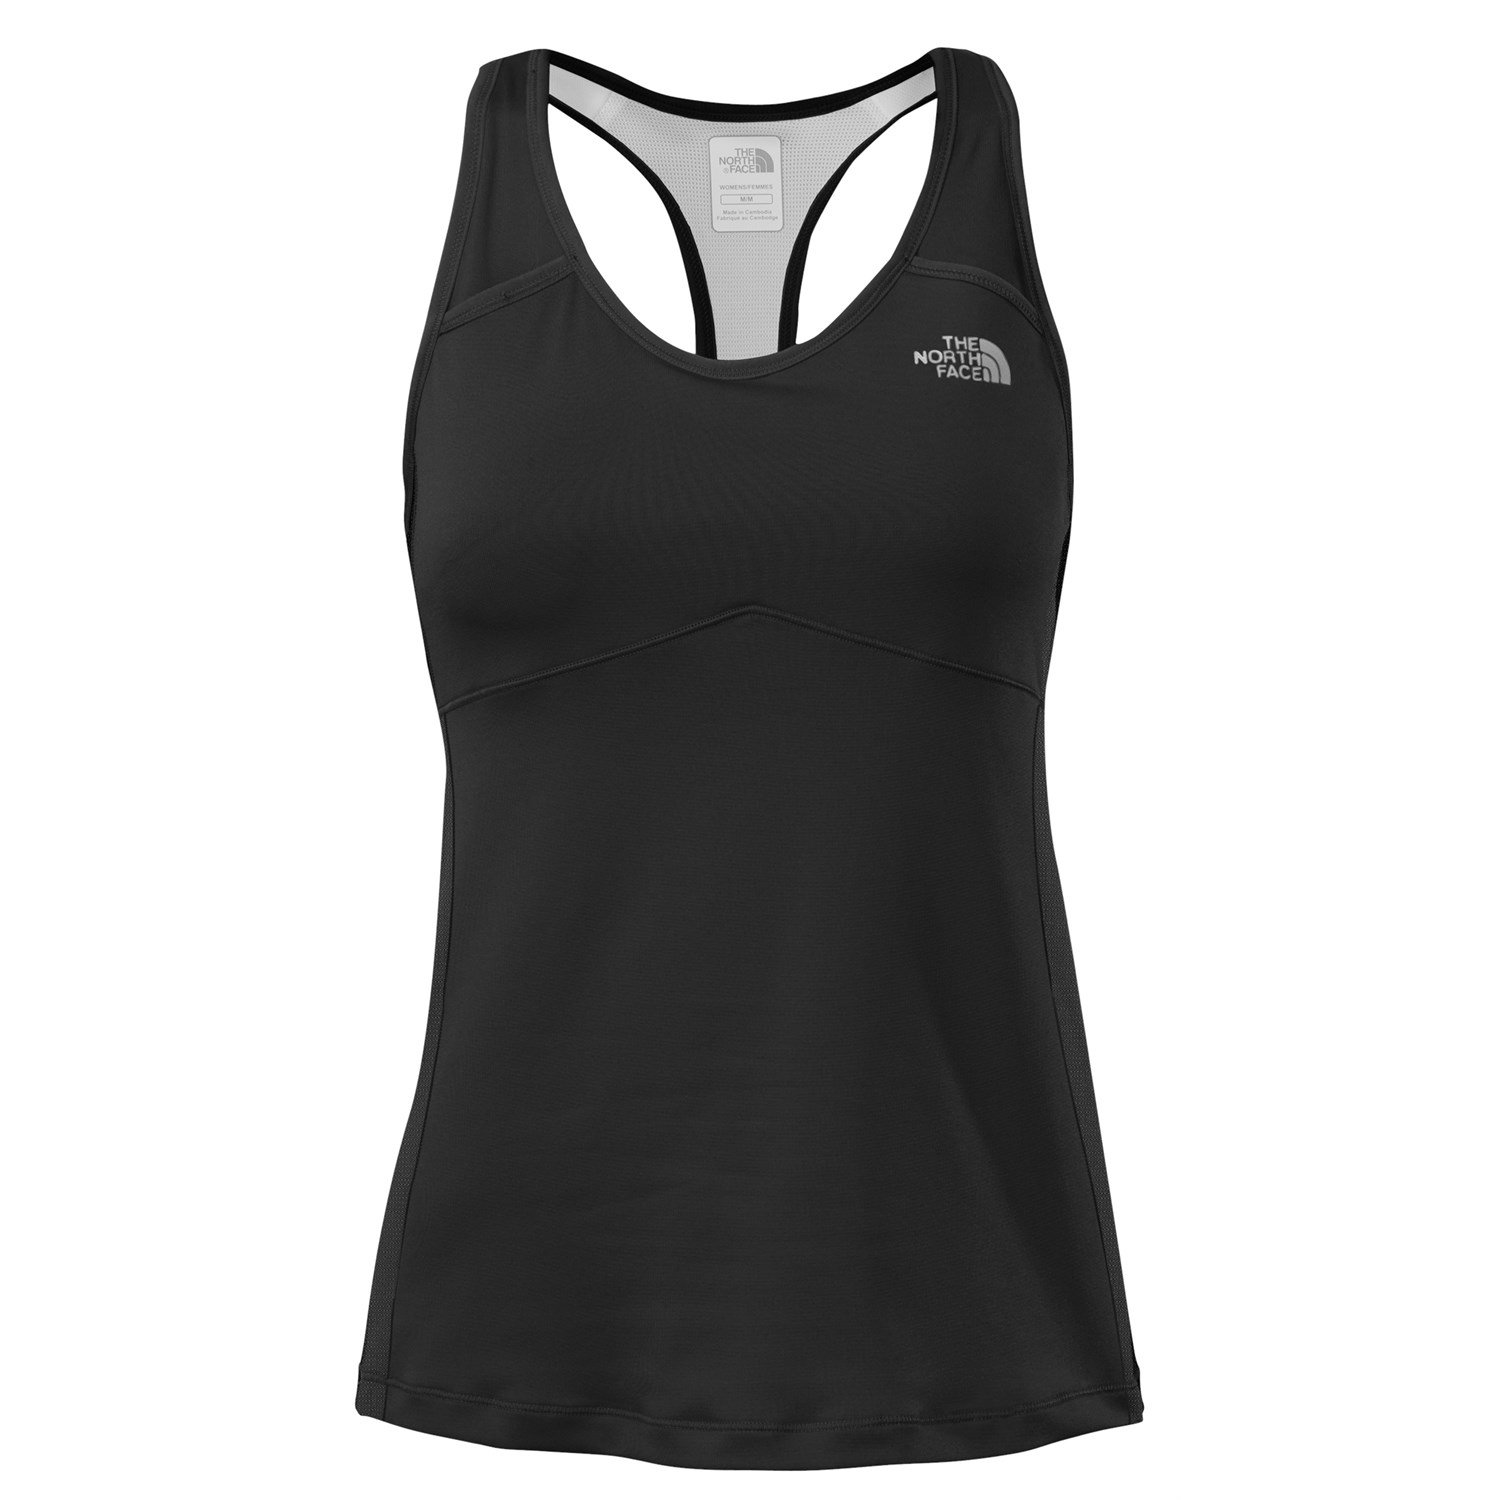 The North Face Eat My Dust Sport Tank Top - Women's